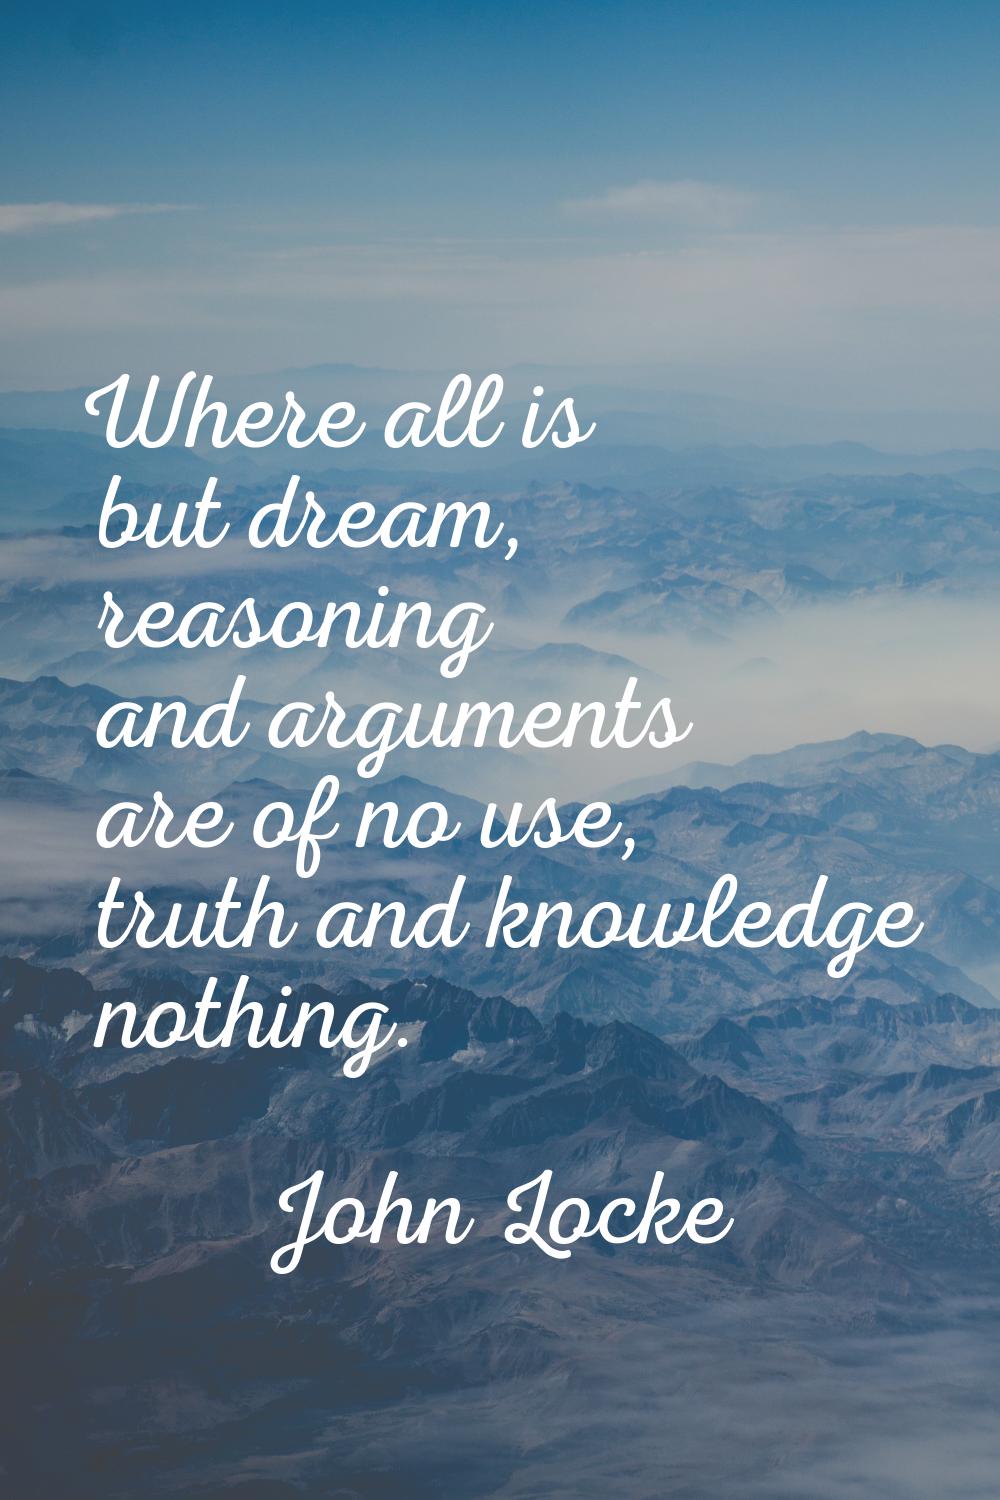 Where all is but dream, reasoning and arguments are of no use, truth and knowledge nothing.